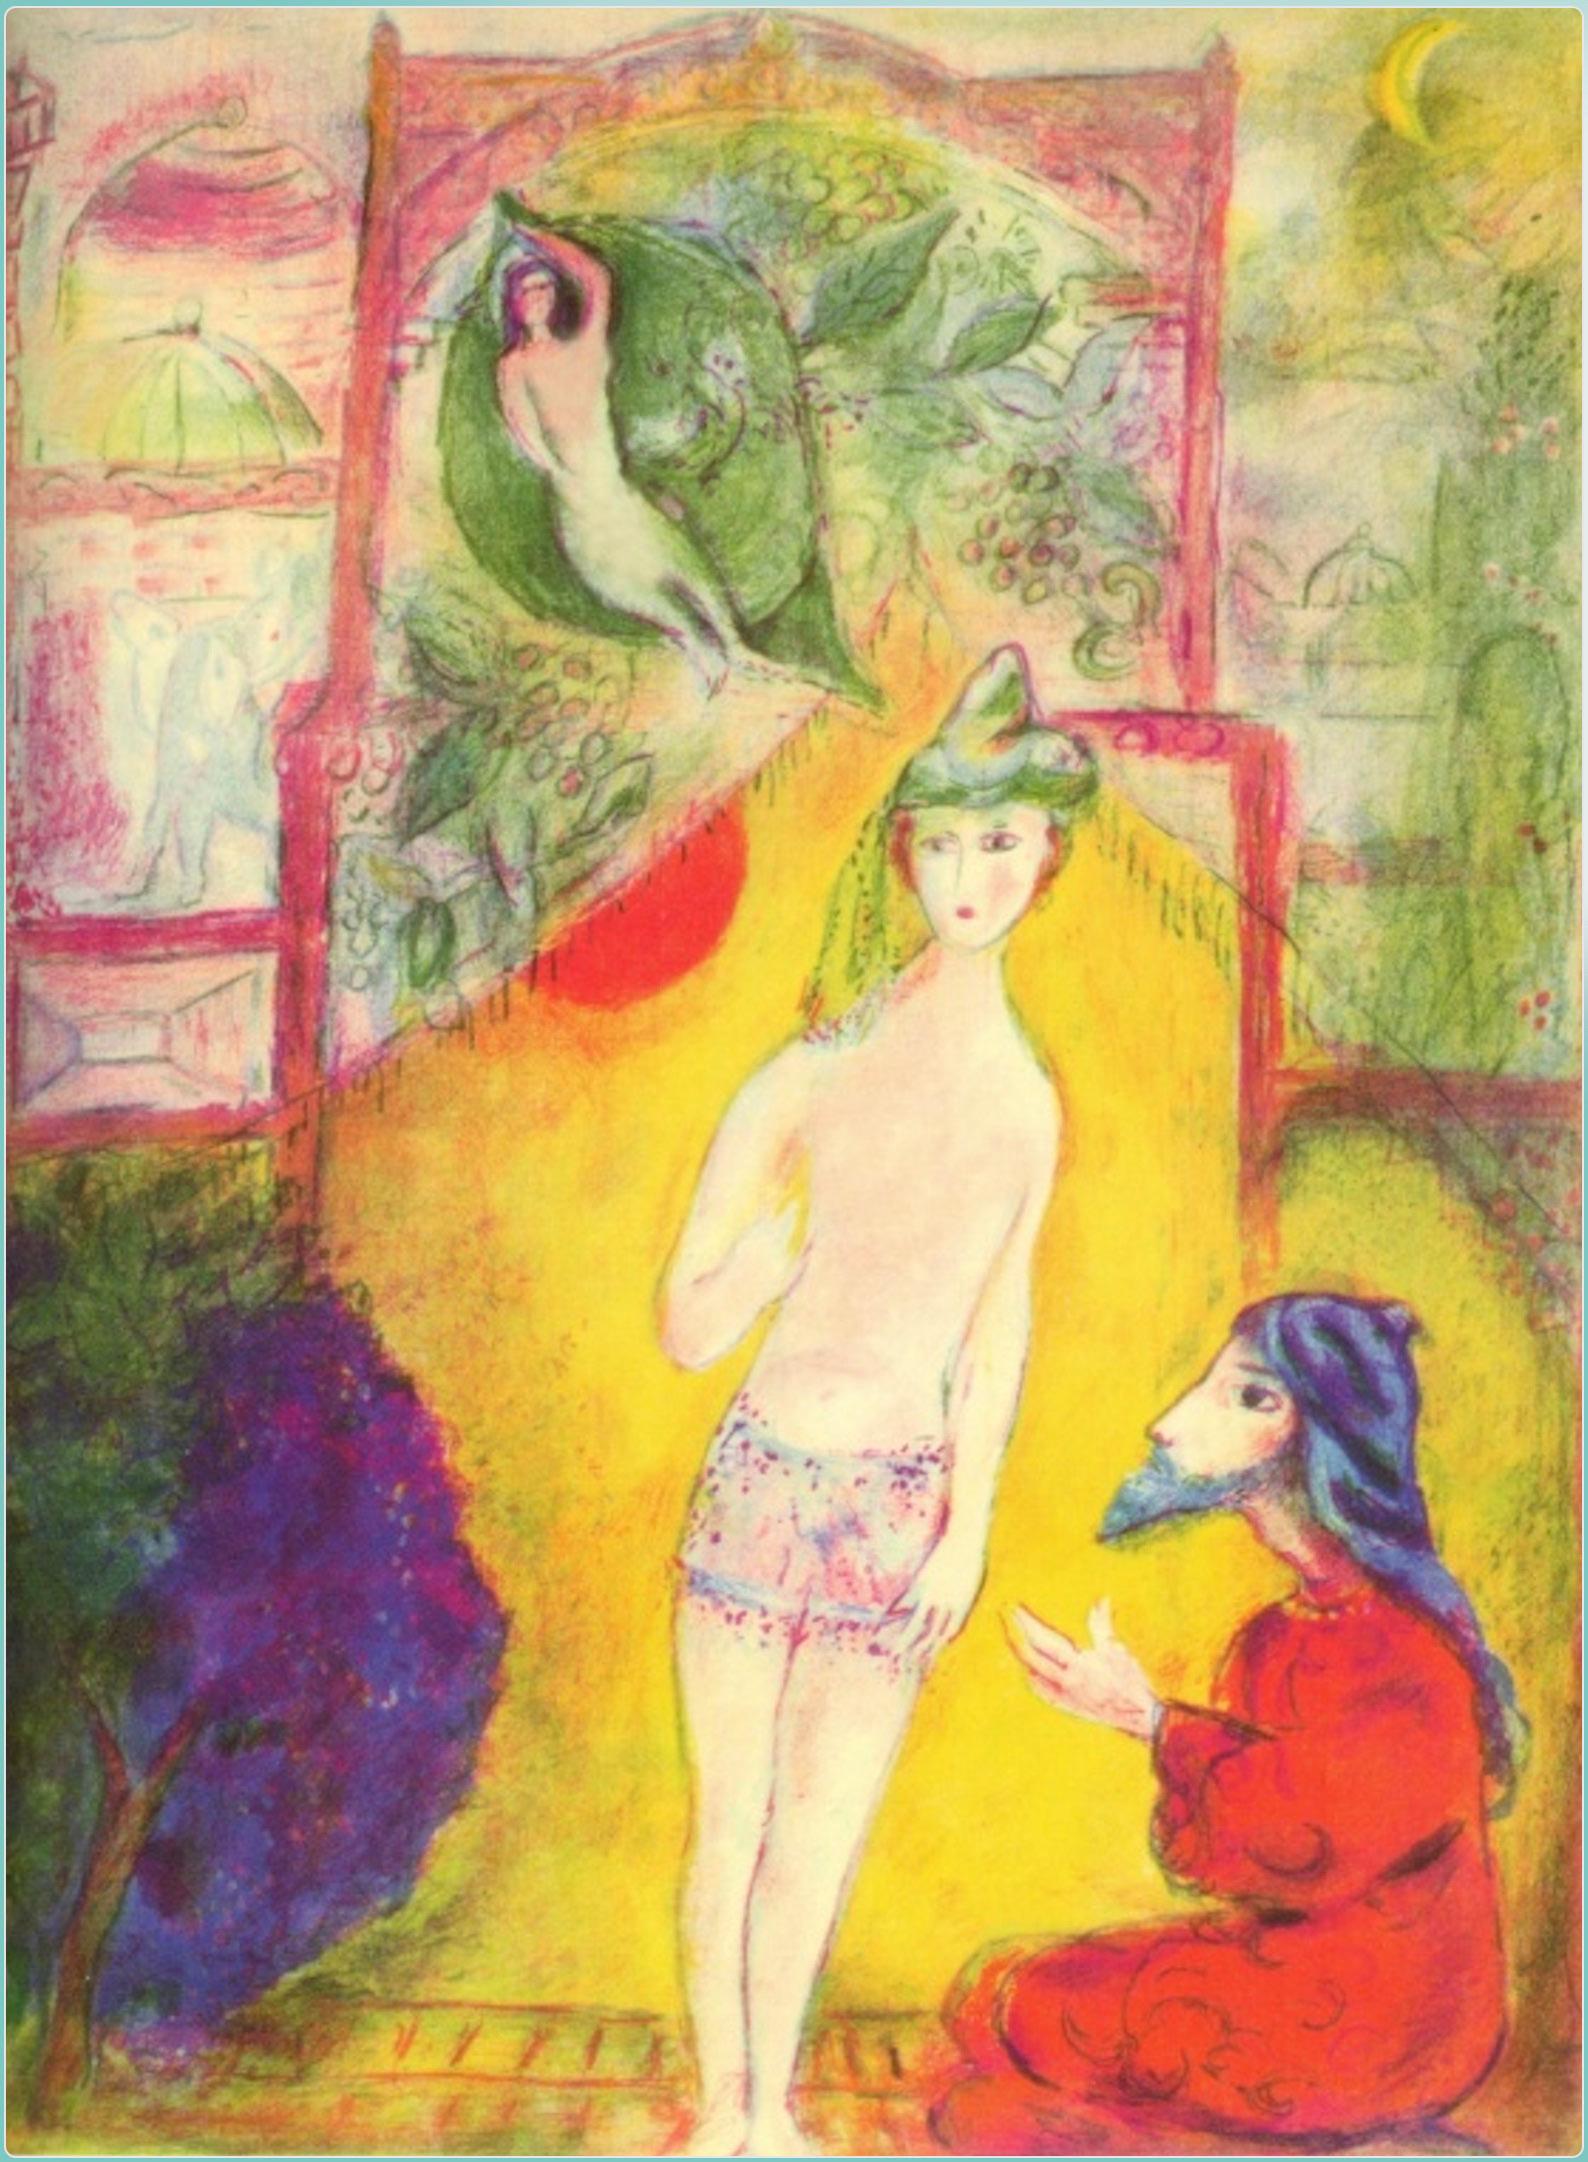 Figure 2. Nine hundred and sixty-fifth  night, from One Thousand and One Nights (1948), Chagall. Source: Arabian  Nights by Chagall According to Asl, Khosravi, and Baqer,